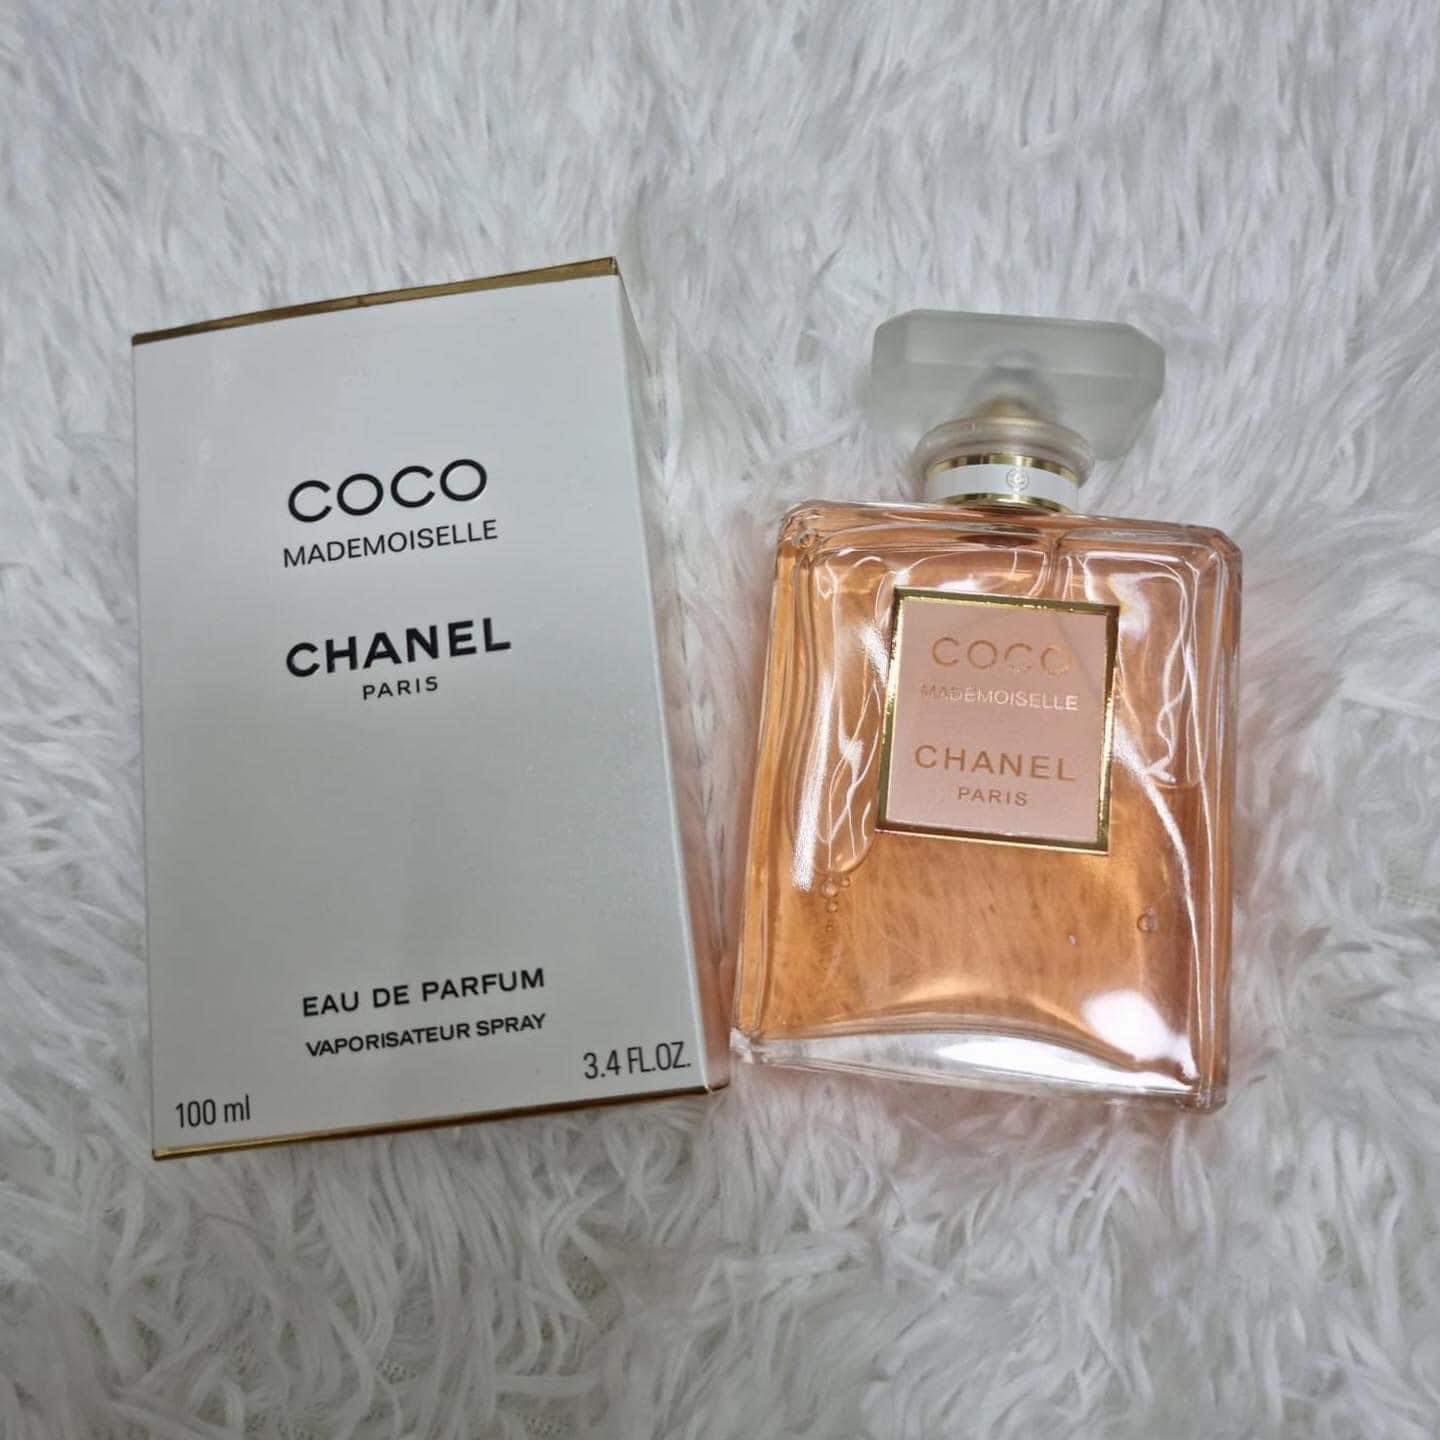 Coco Mademoiselle Chanel perfume - a fragrance for women 2001